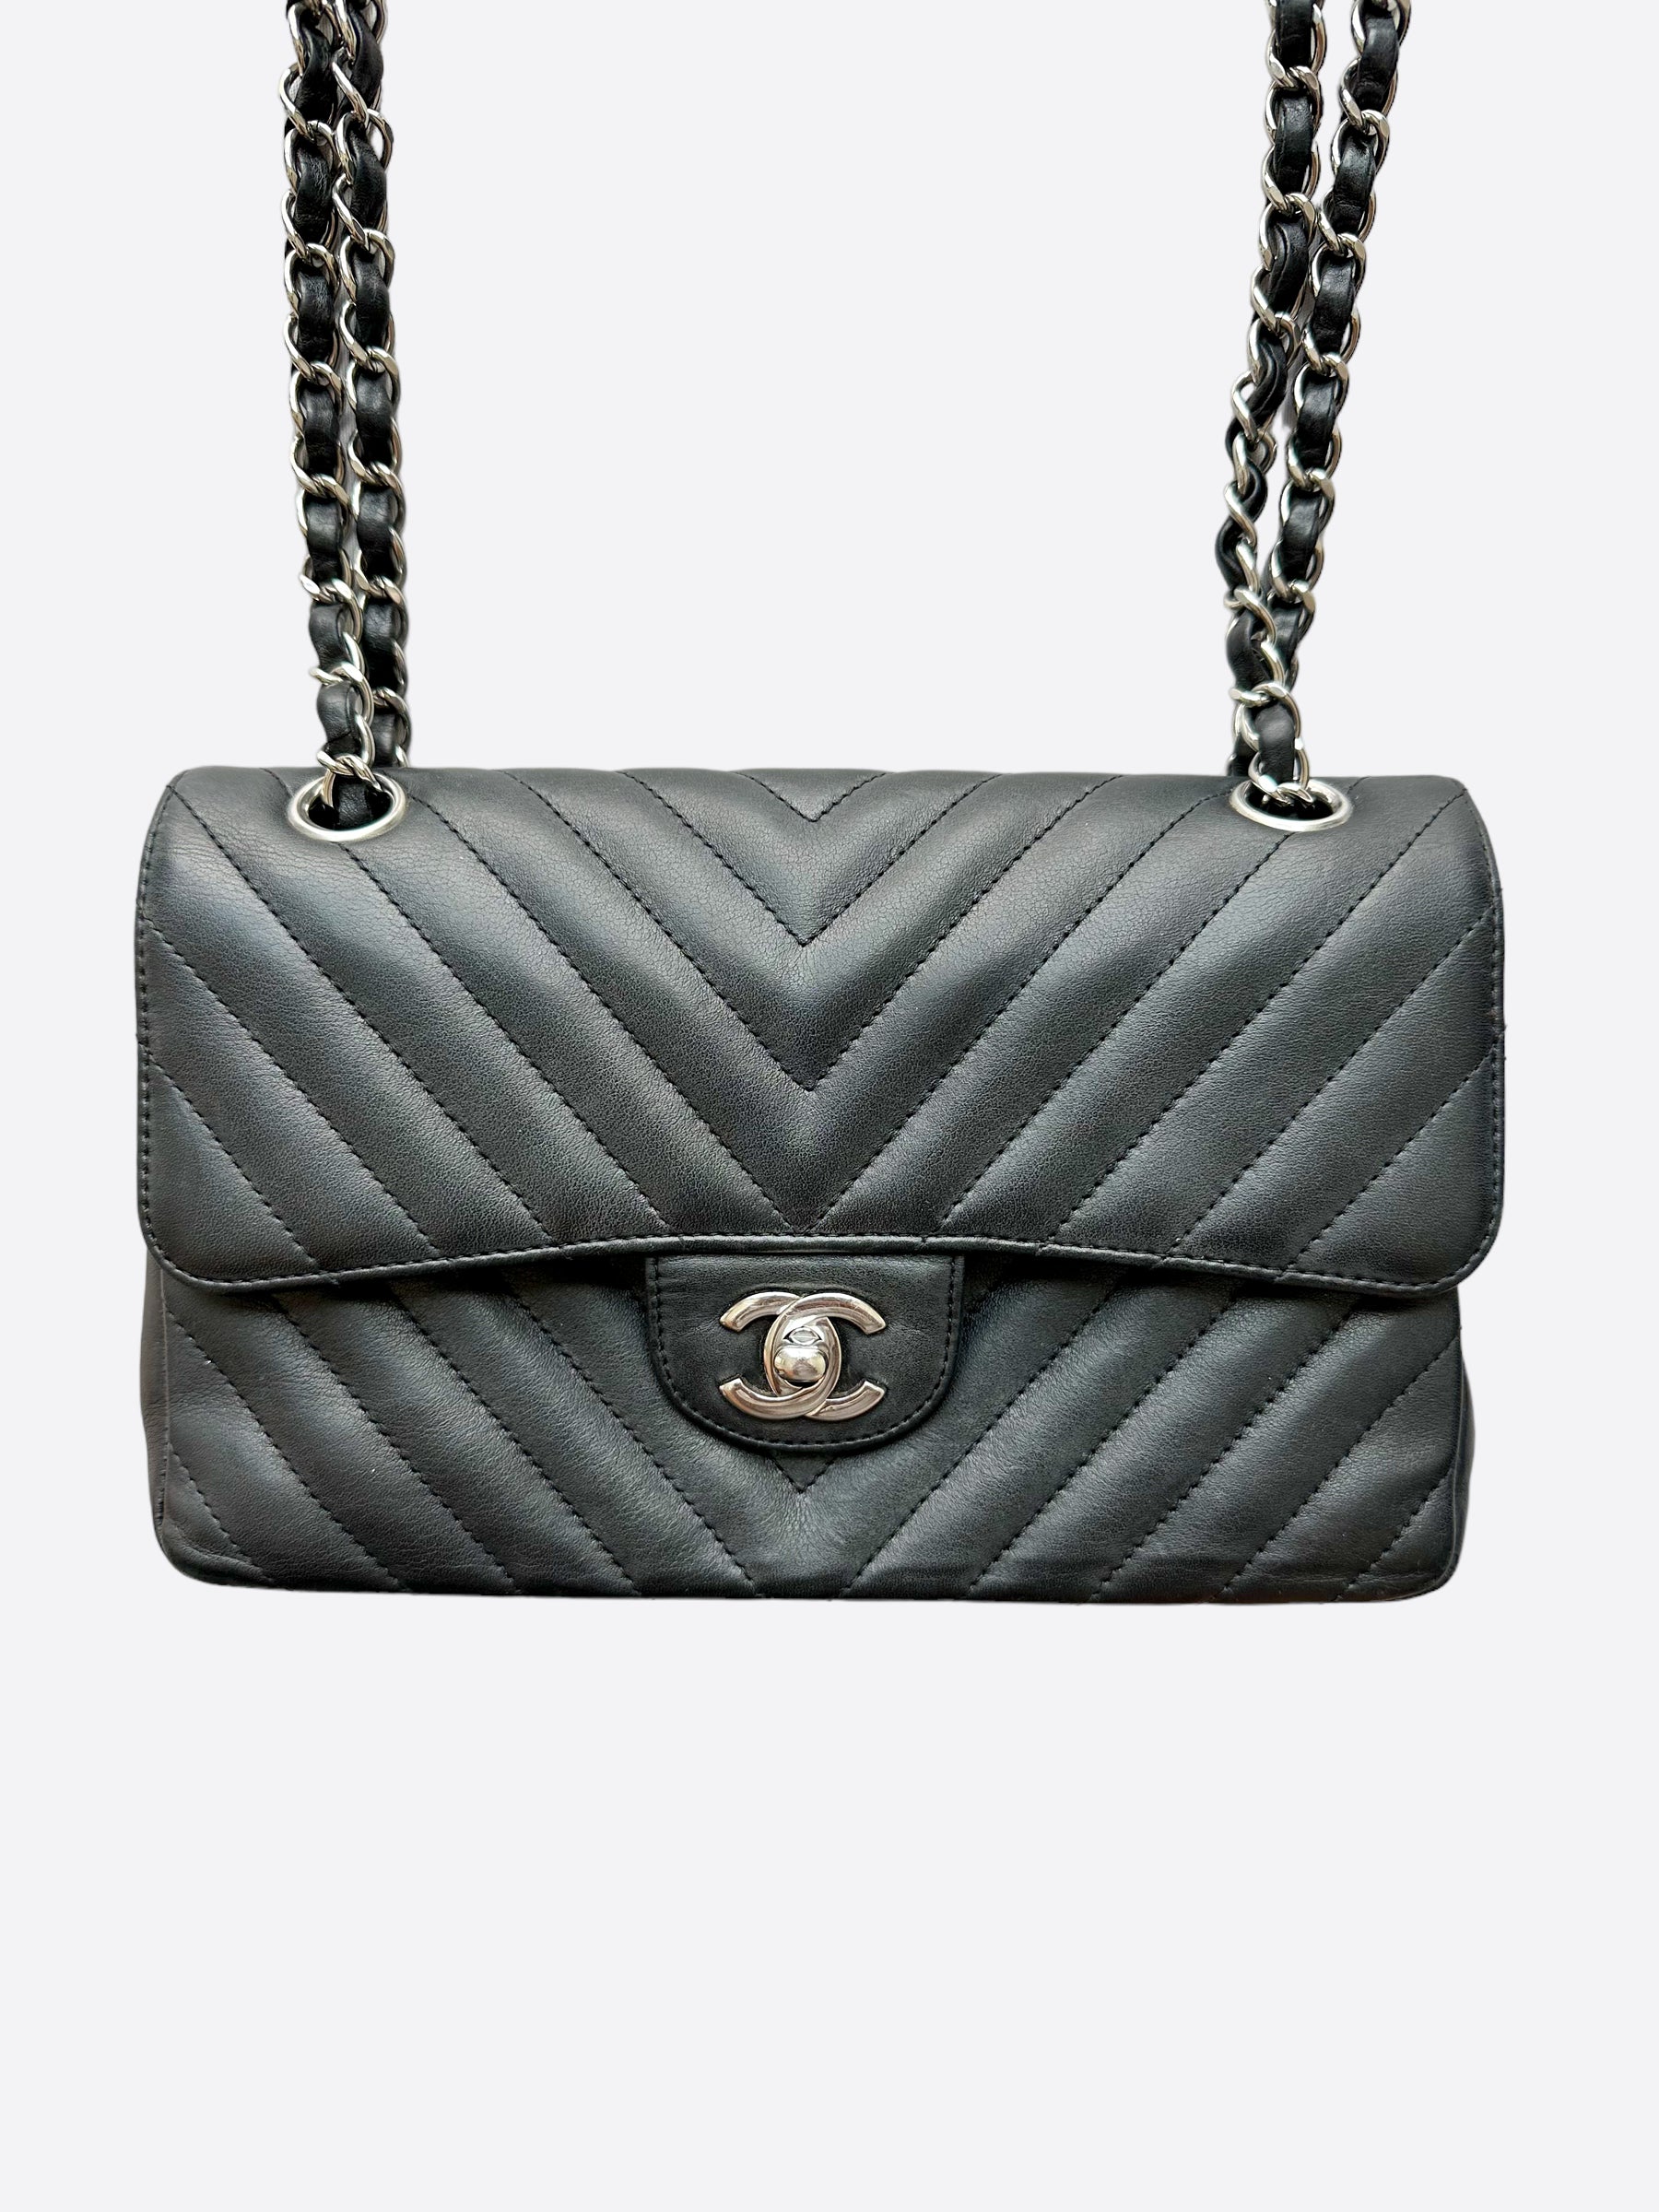 CHANEL, Bags, Chanel Lambskin Chevron Quilted Mini Flap So Black